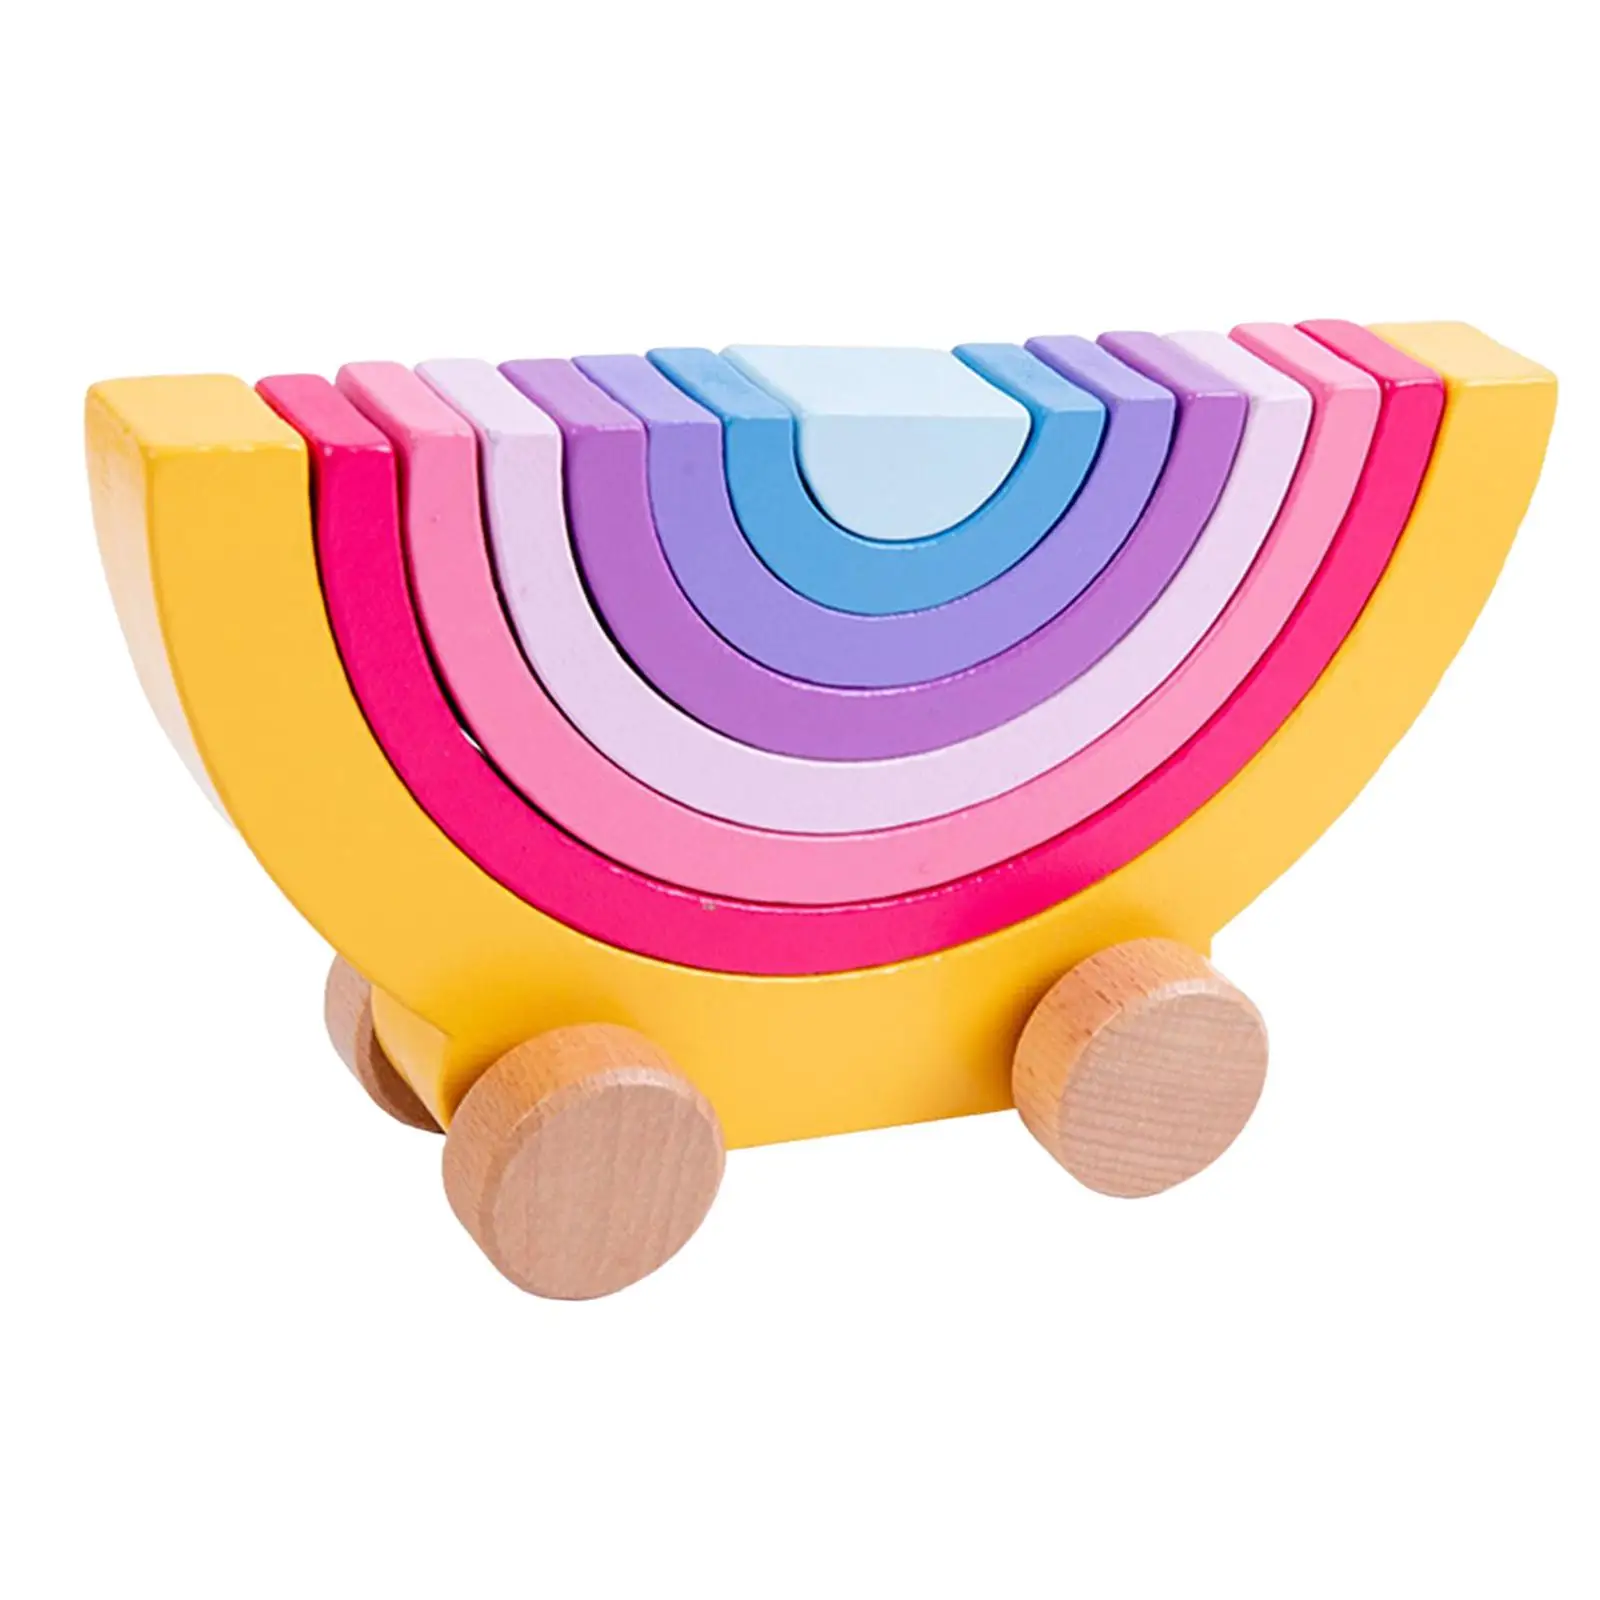 Wooden Building Blocks Car Toy Stackable Ornament Development Colorful Gift Stacker Creative Arch for Toddlers Children Teaching